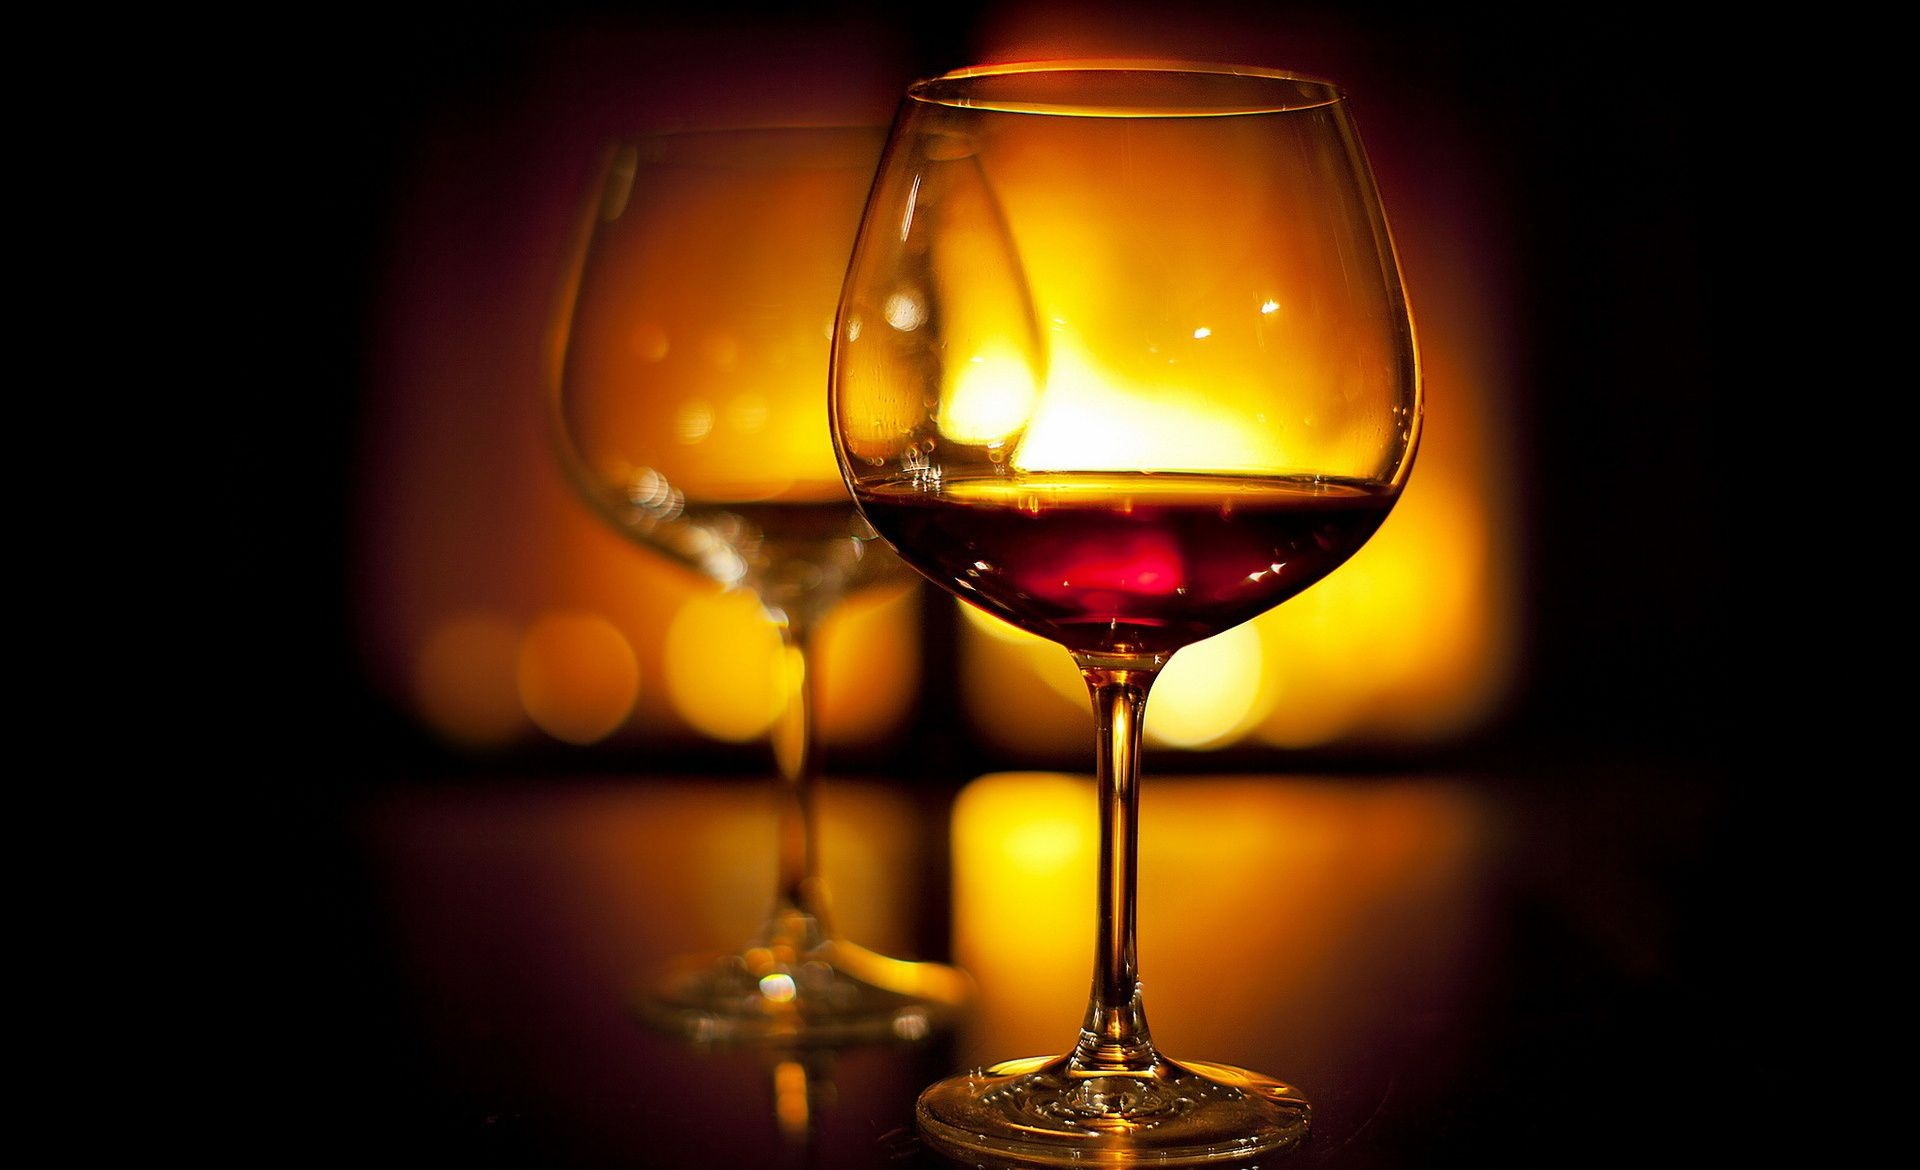 HD wallpapers, Wine glass aesthetic, Wine enthusiasts, Rich colors, 1920x1170 HD Desktop